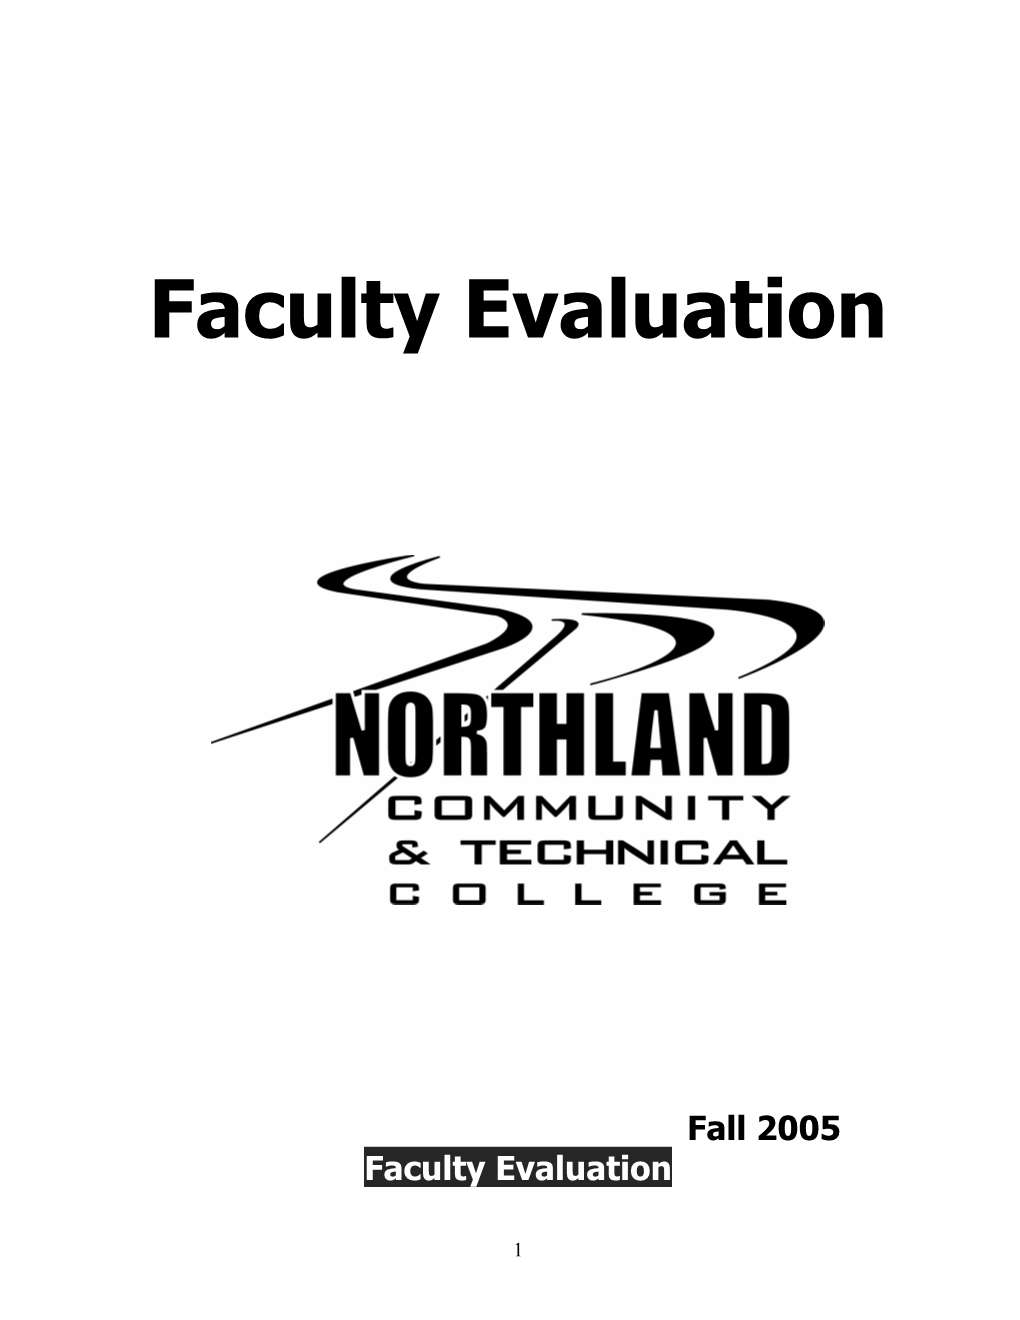 Faculty Evaluation